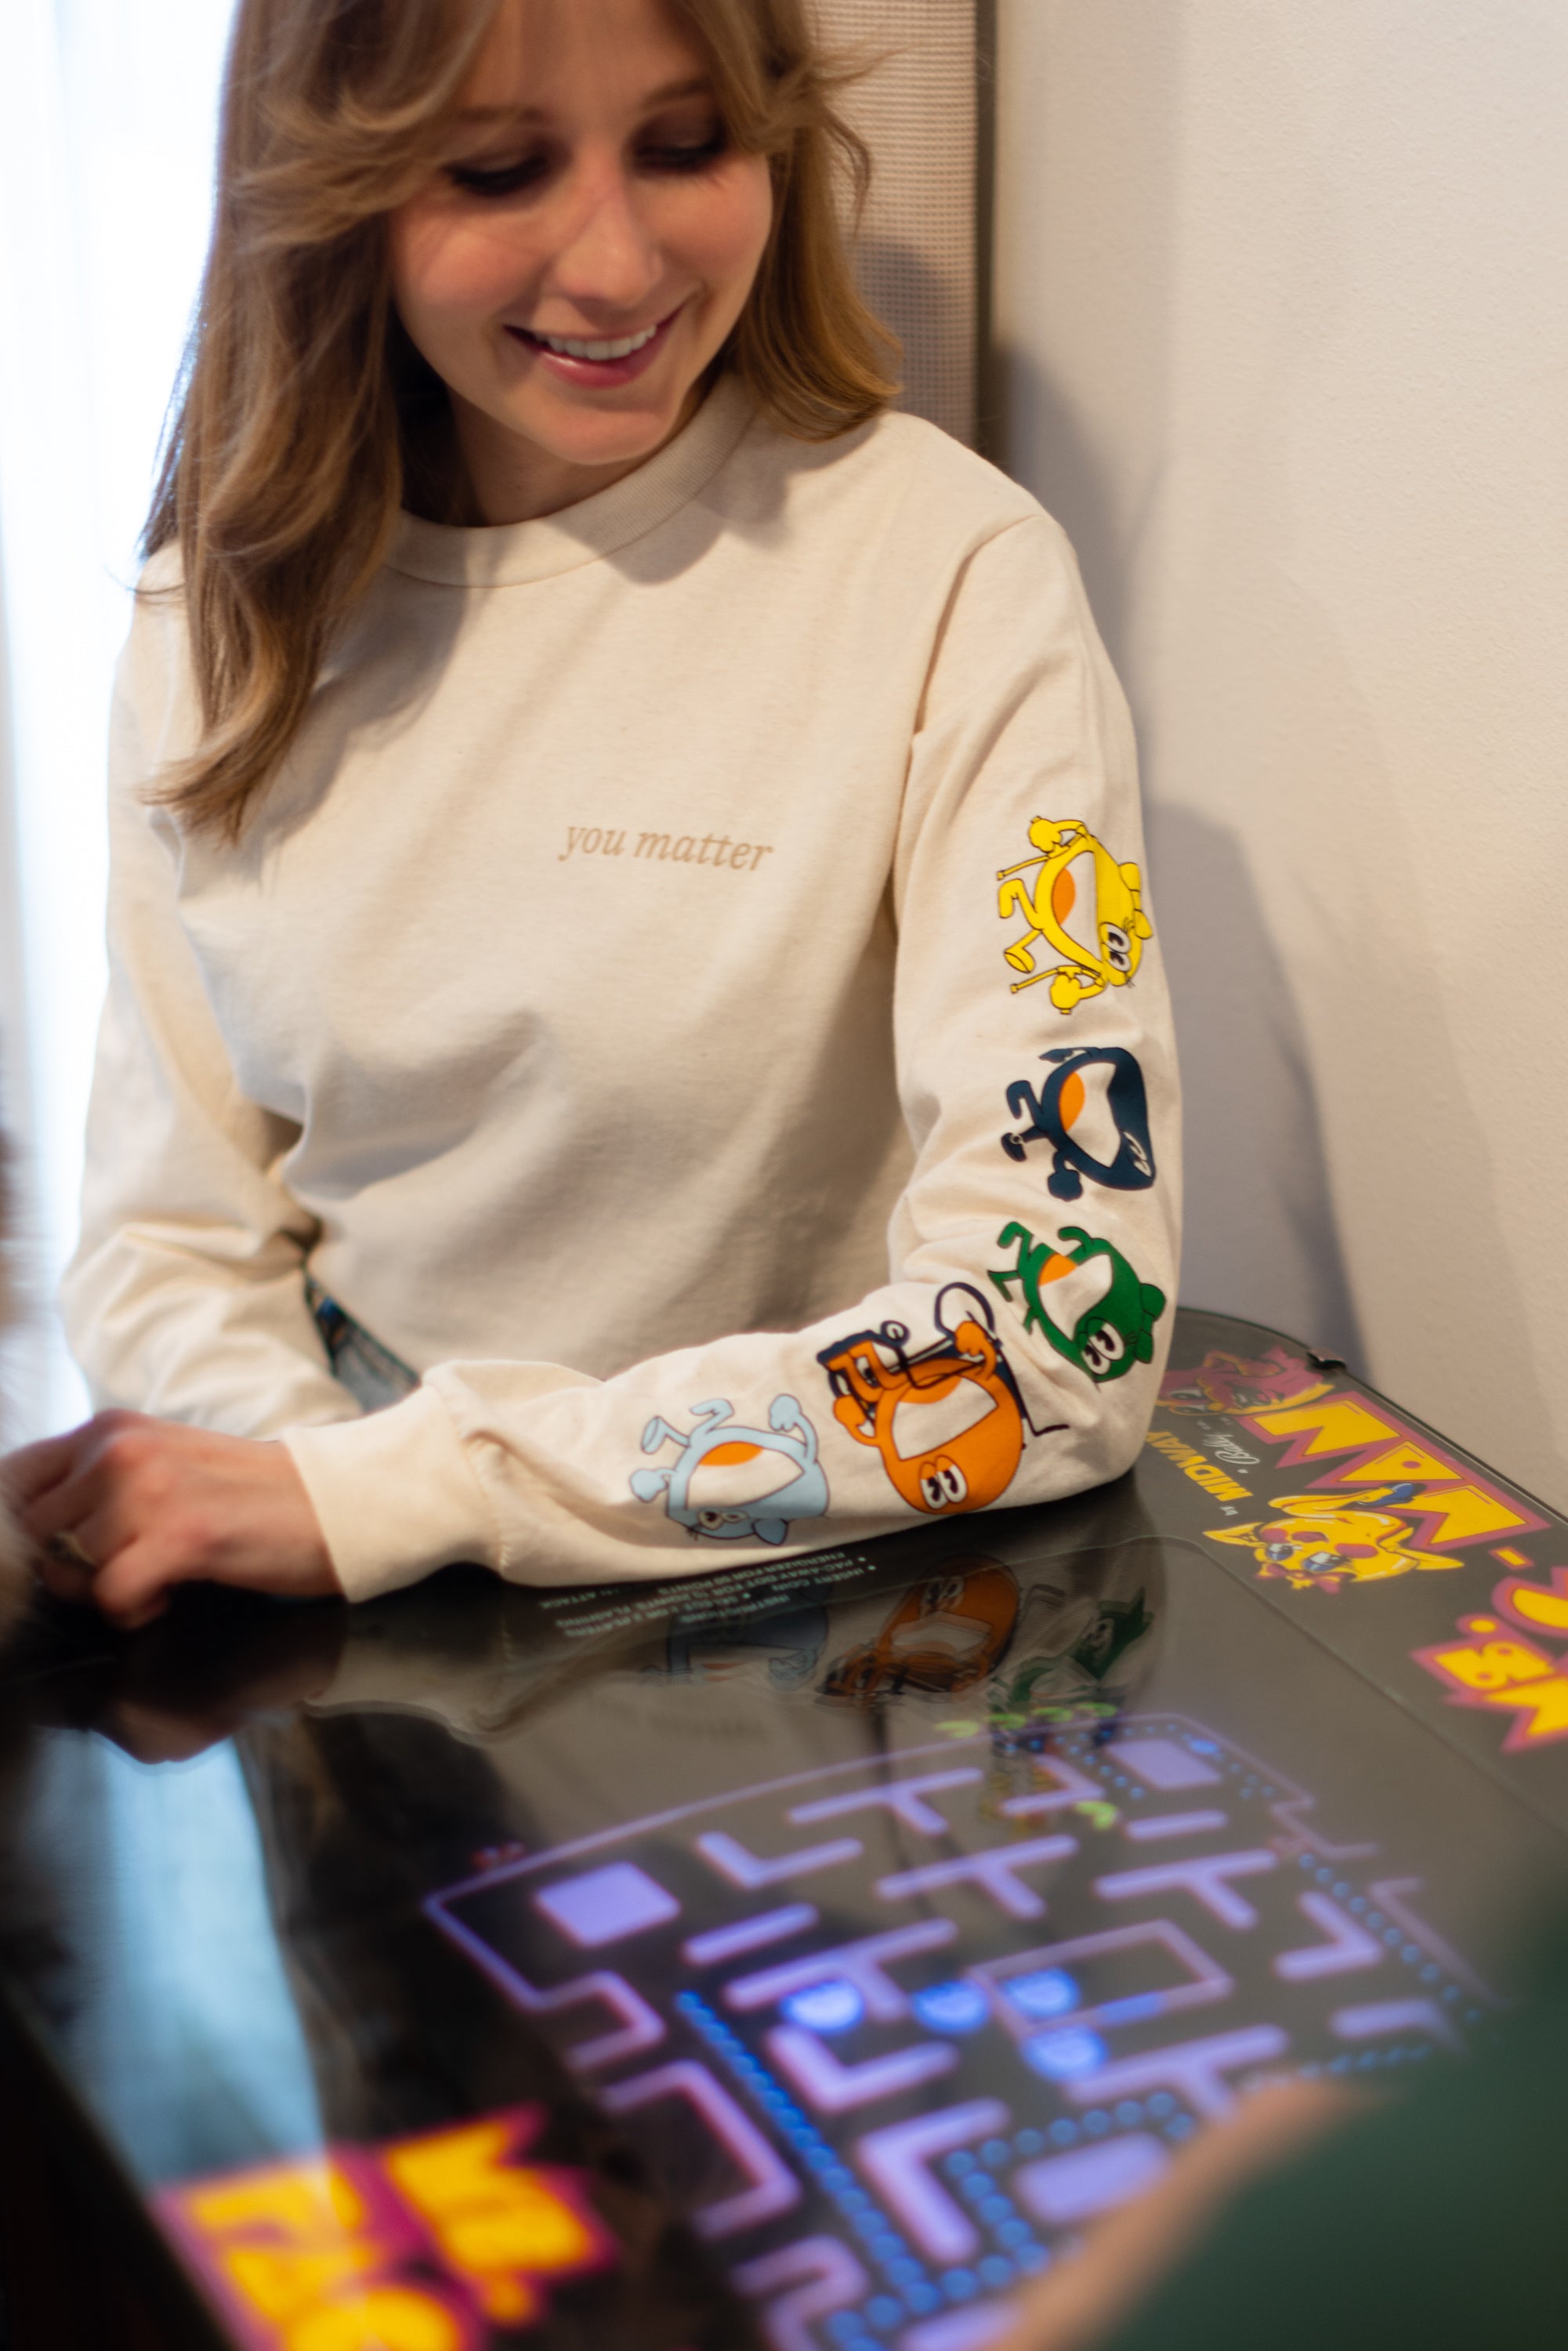 A blonde hair women wearing a cream long sleeve shirt. The cream long sleeve reads 'you matter' on the standard pocket area of the t-shirt. Running down the sleeve is multiple characters: A yellow one, navy, green, red, and light blue. The woman is sitting down playing a vintage game. 